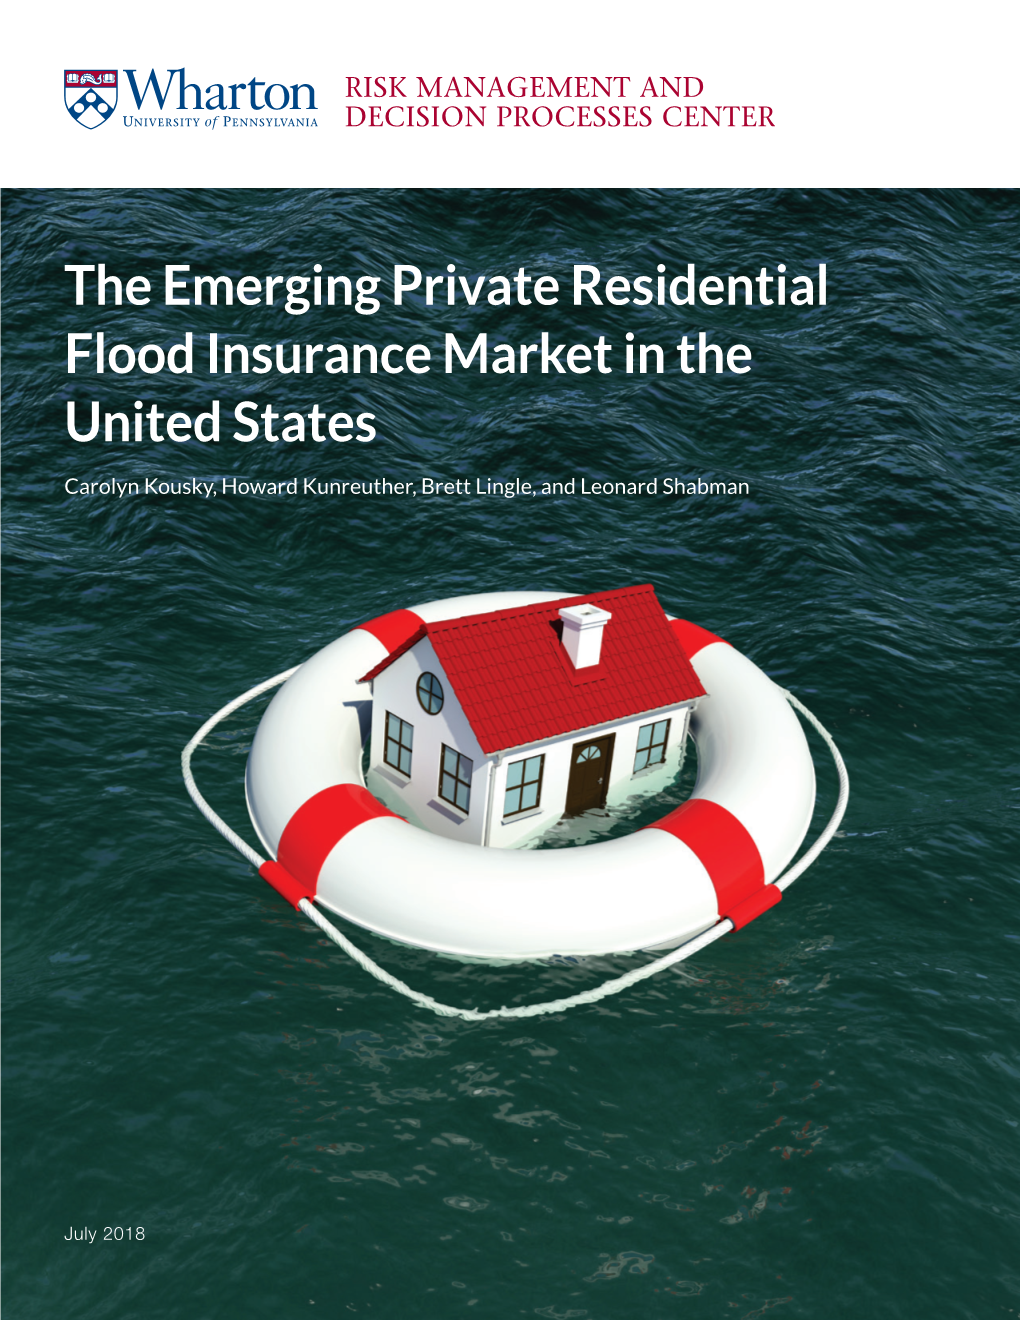 The Emerging Private Residential Flood Insurance Market in the United States